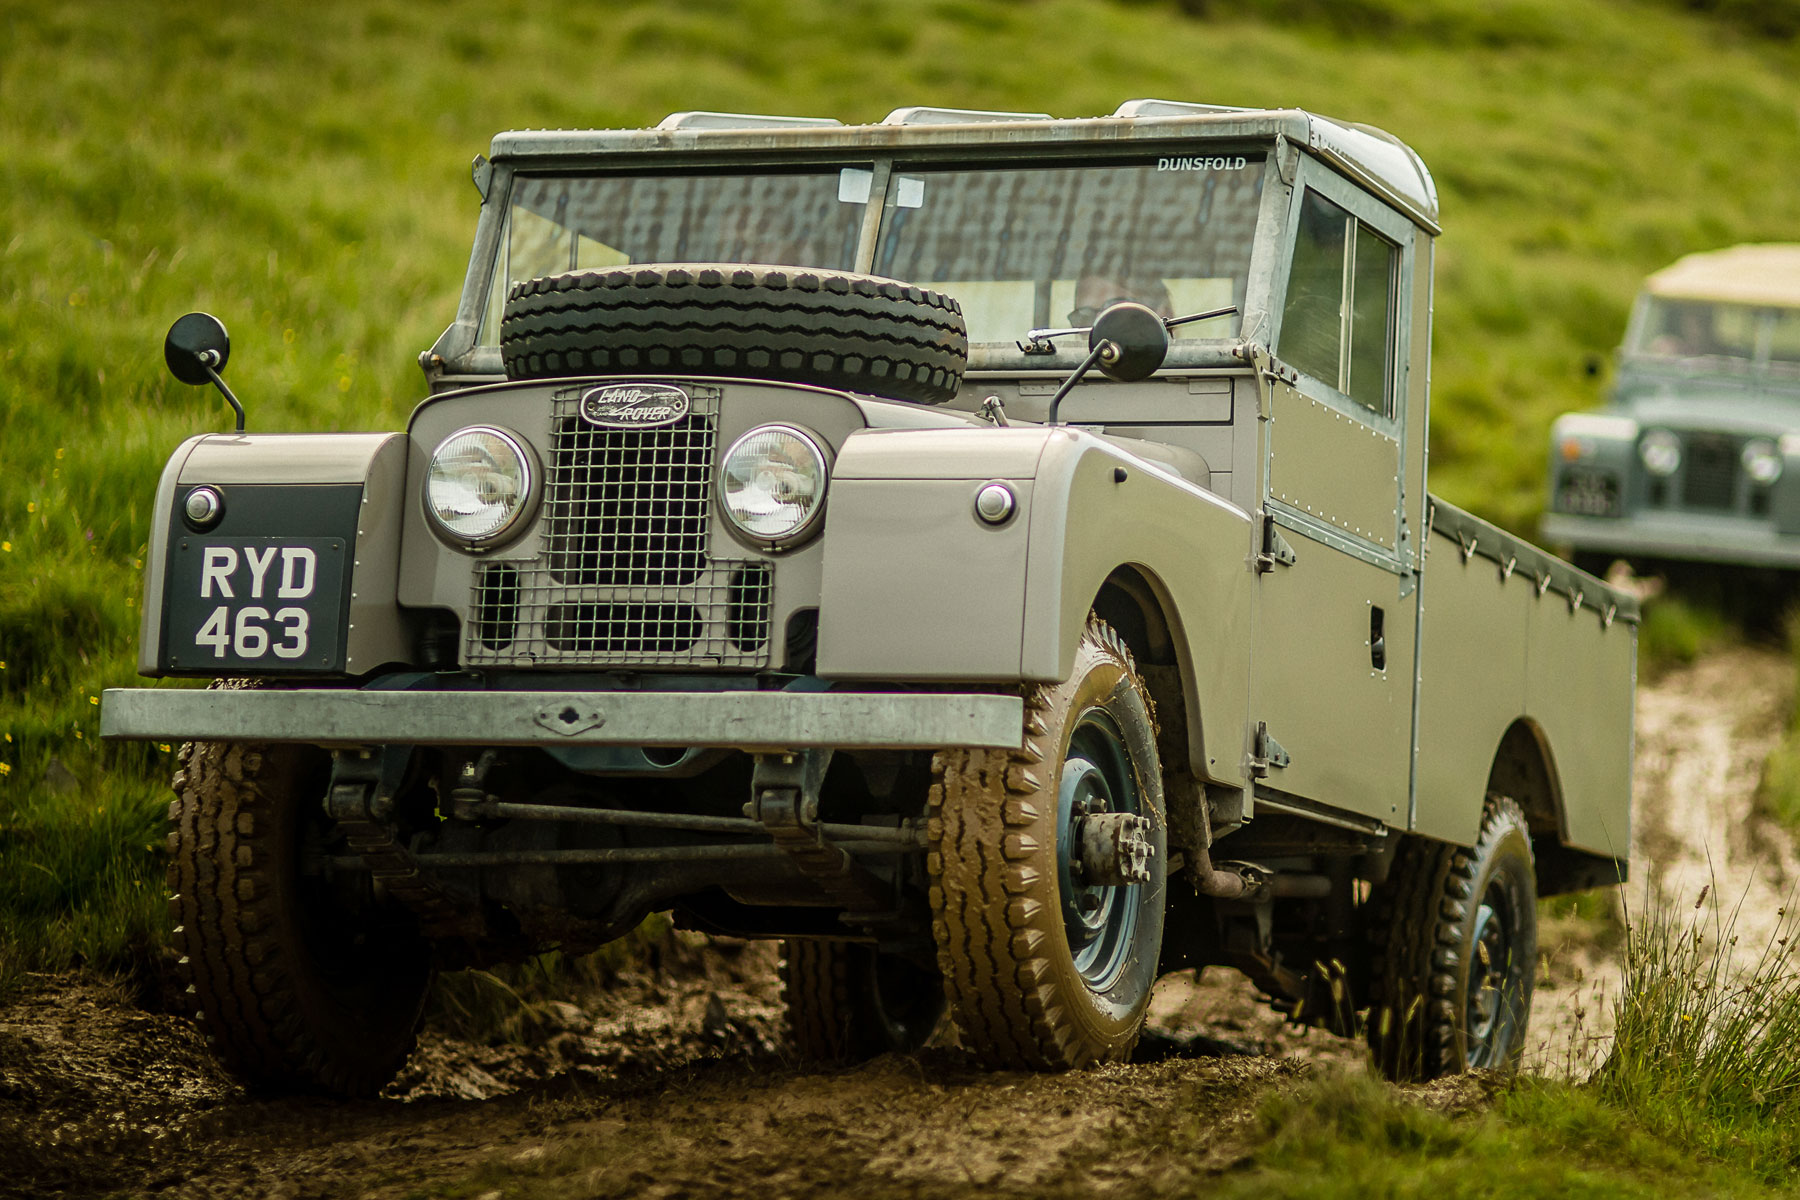 Land Rover Defender driving 70 years of history